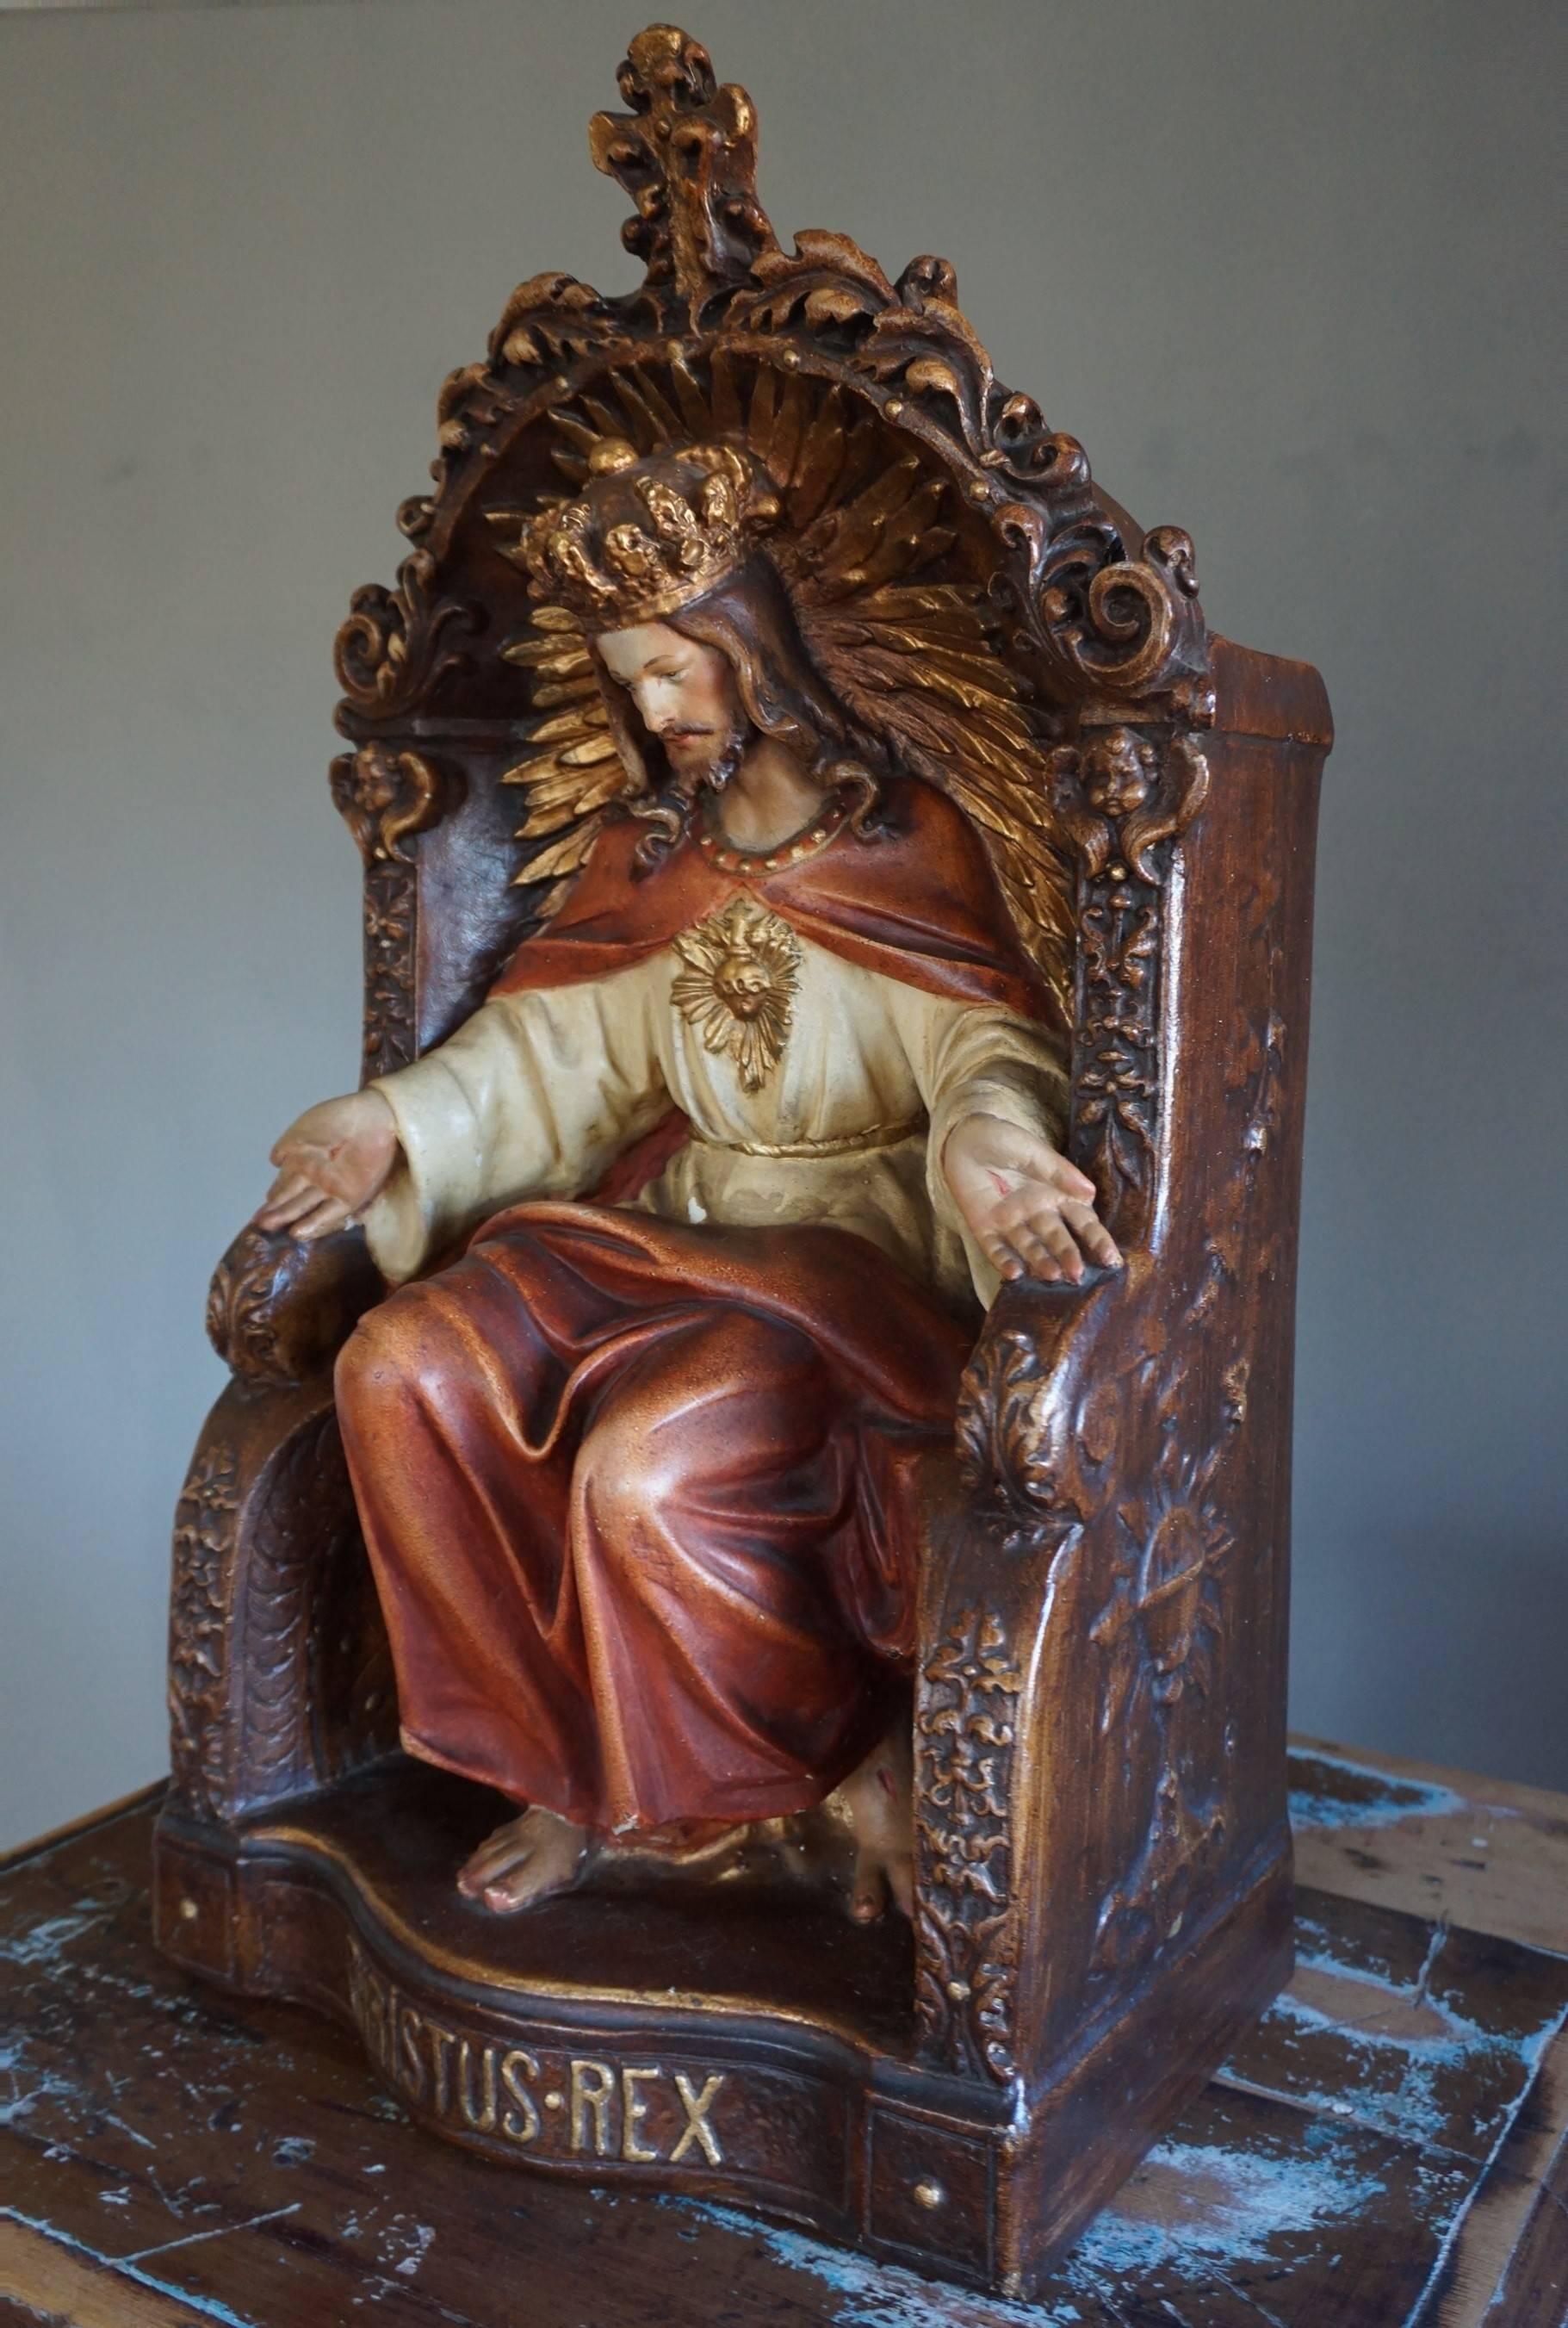 Good size and stunning religious alter/display piece.

This rare and fine quality religious sculpture depicts Jesus on a throne wearing a crown. This obviously is not about Jesus being a king, but much more about his teachings and legacy that should